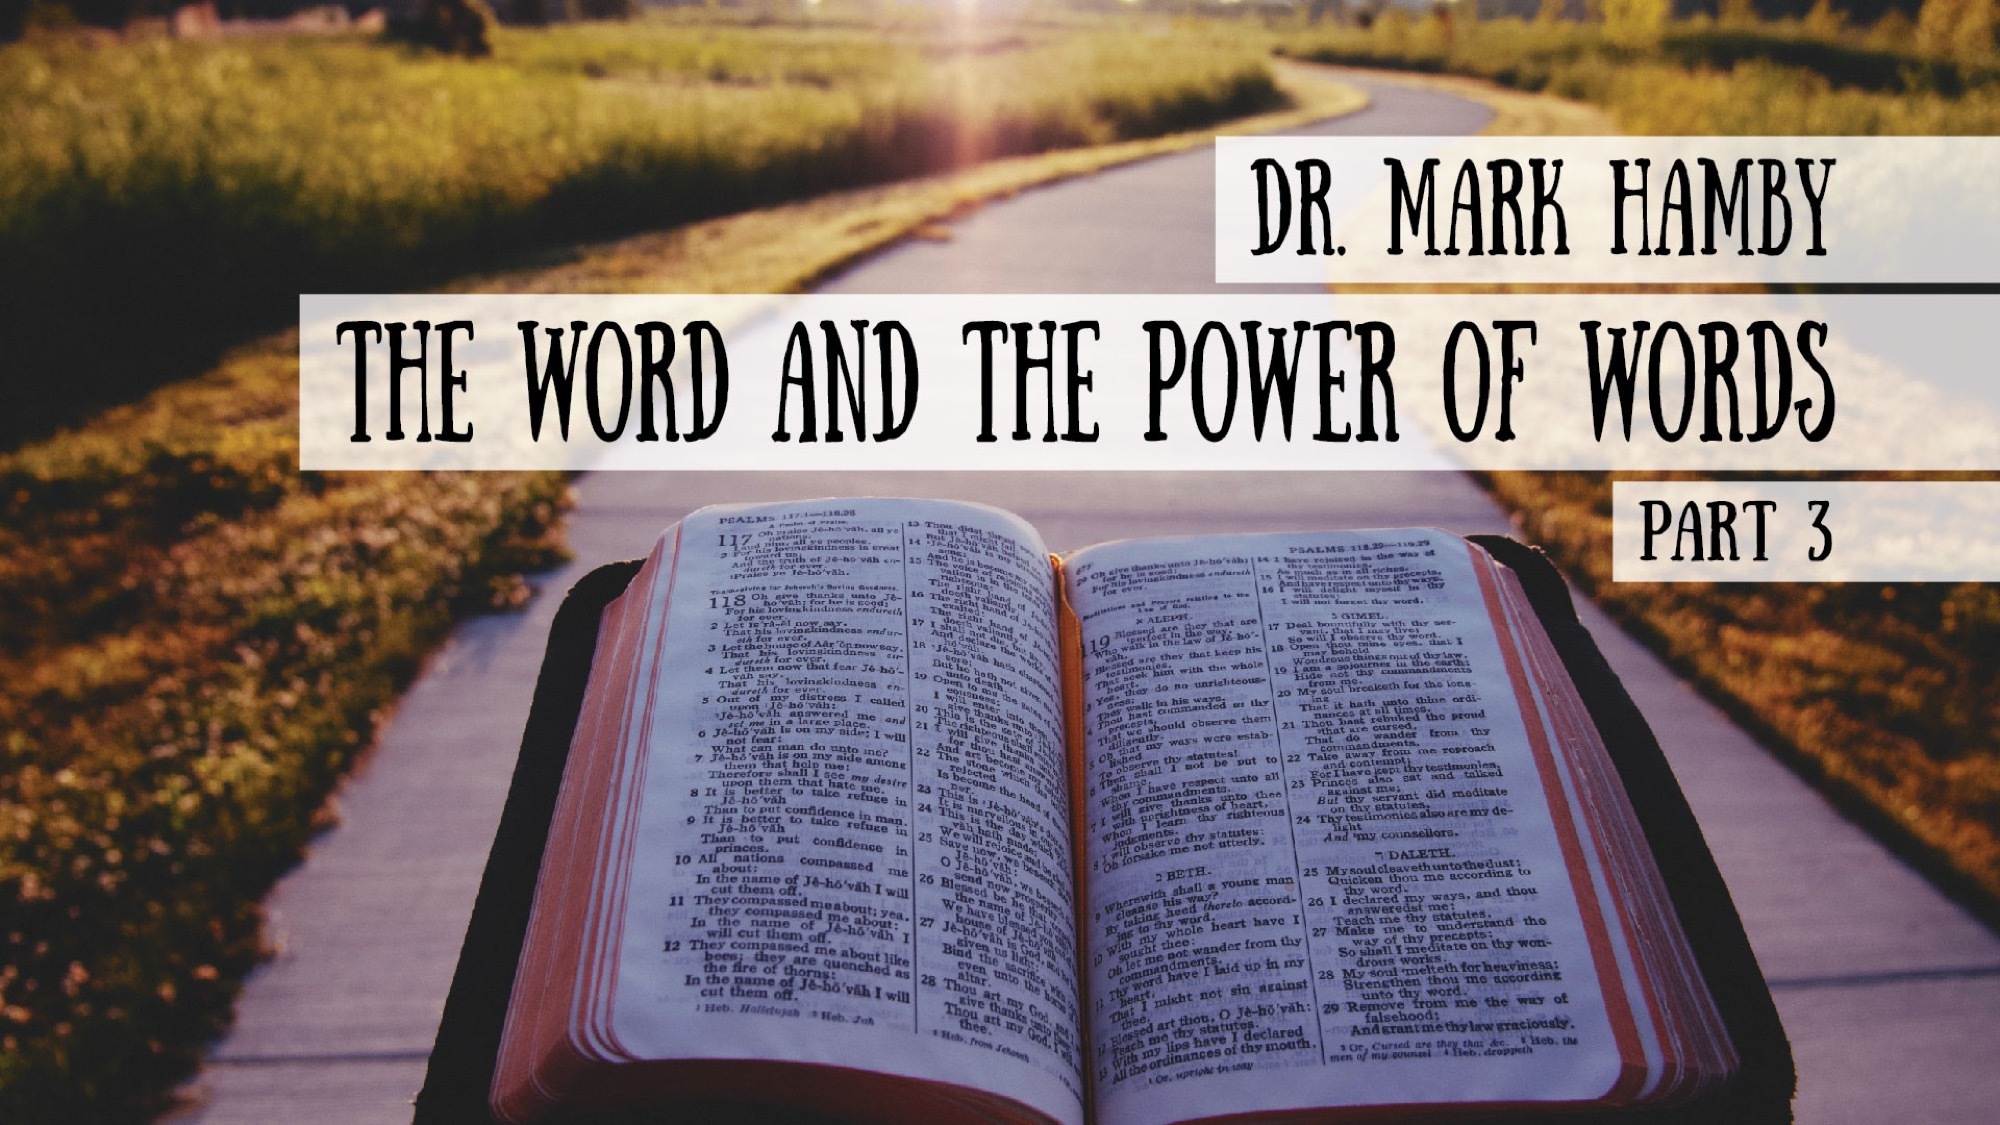 Interview with Dr. Mark Hamby of Lamplighter Ministries